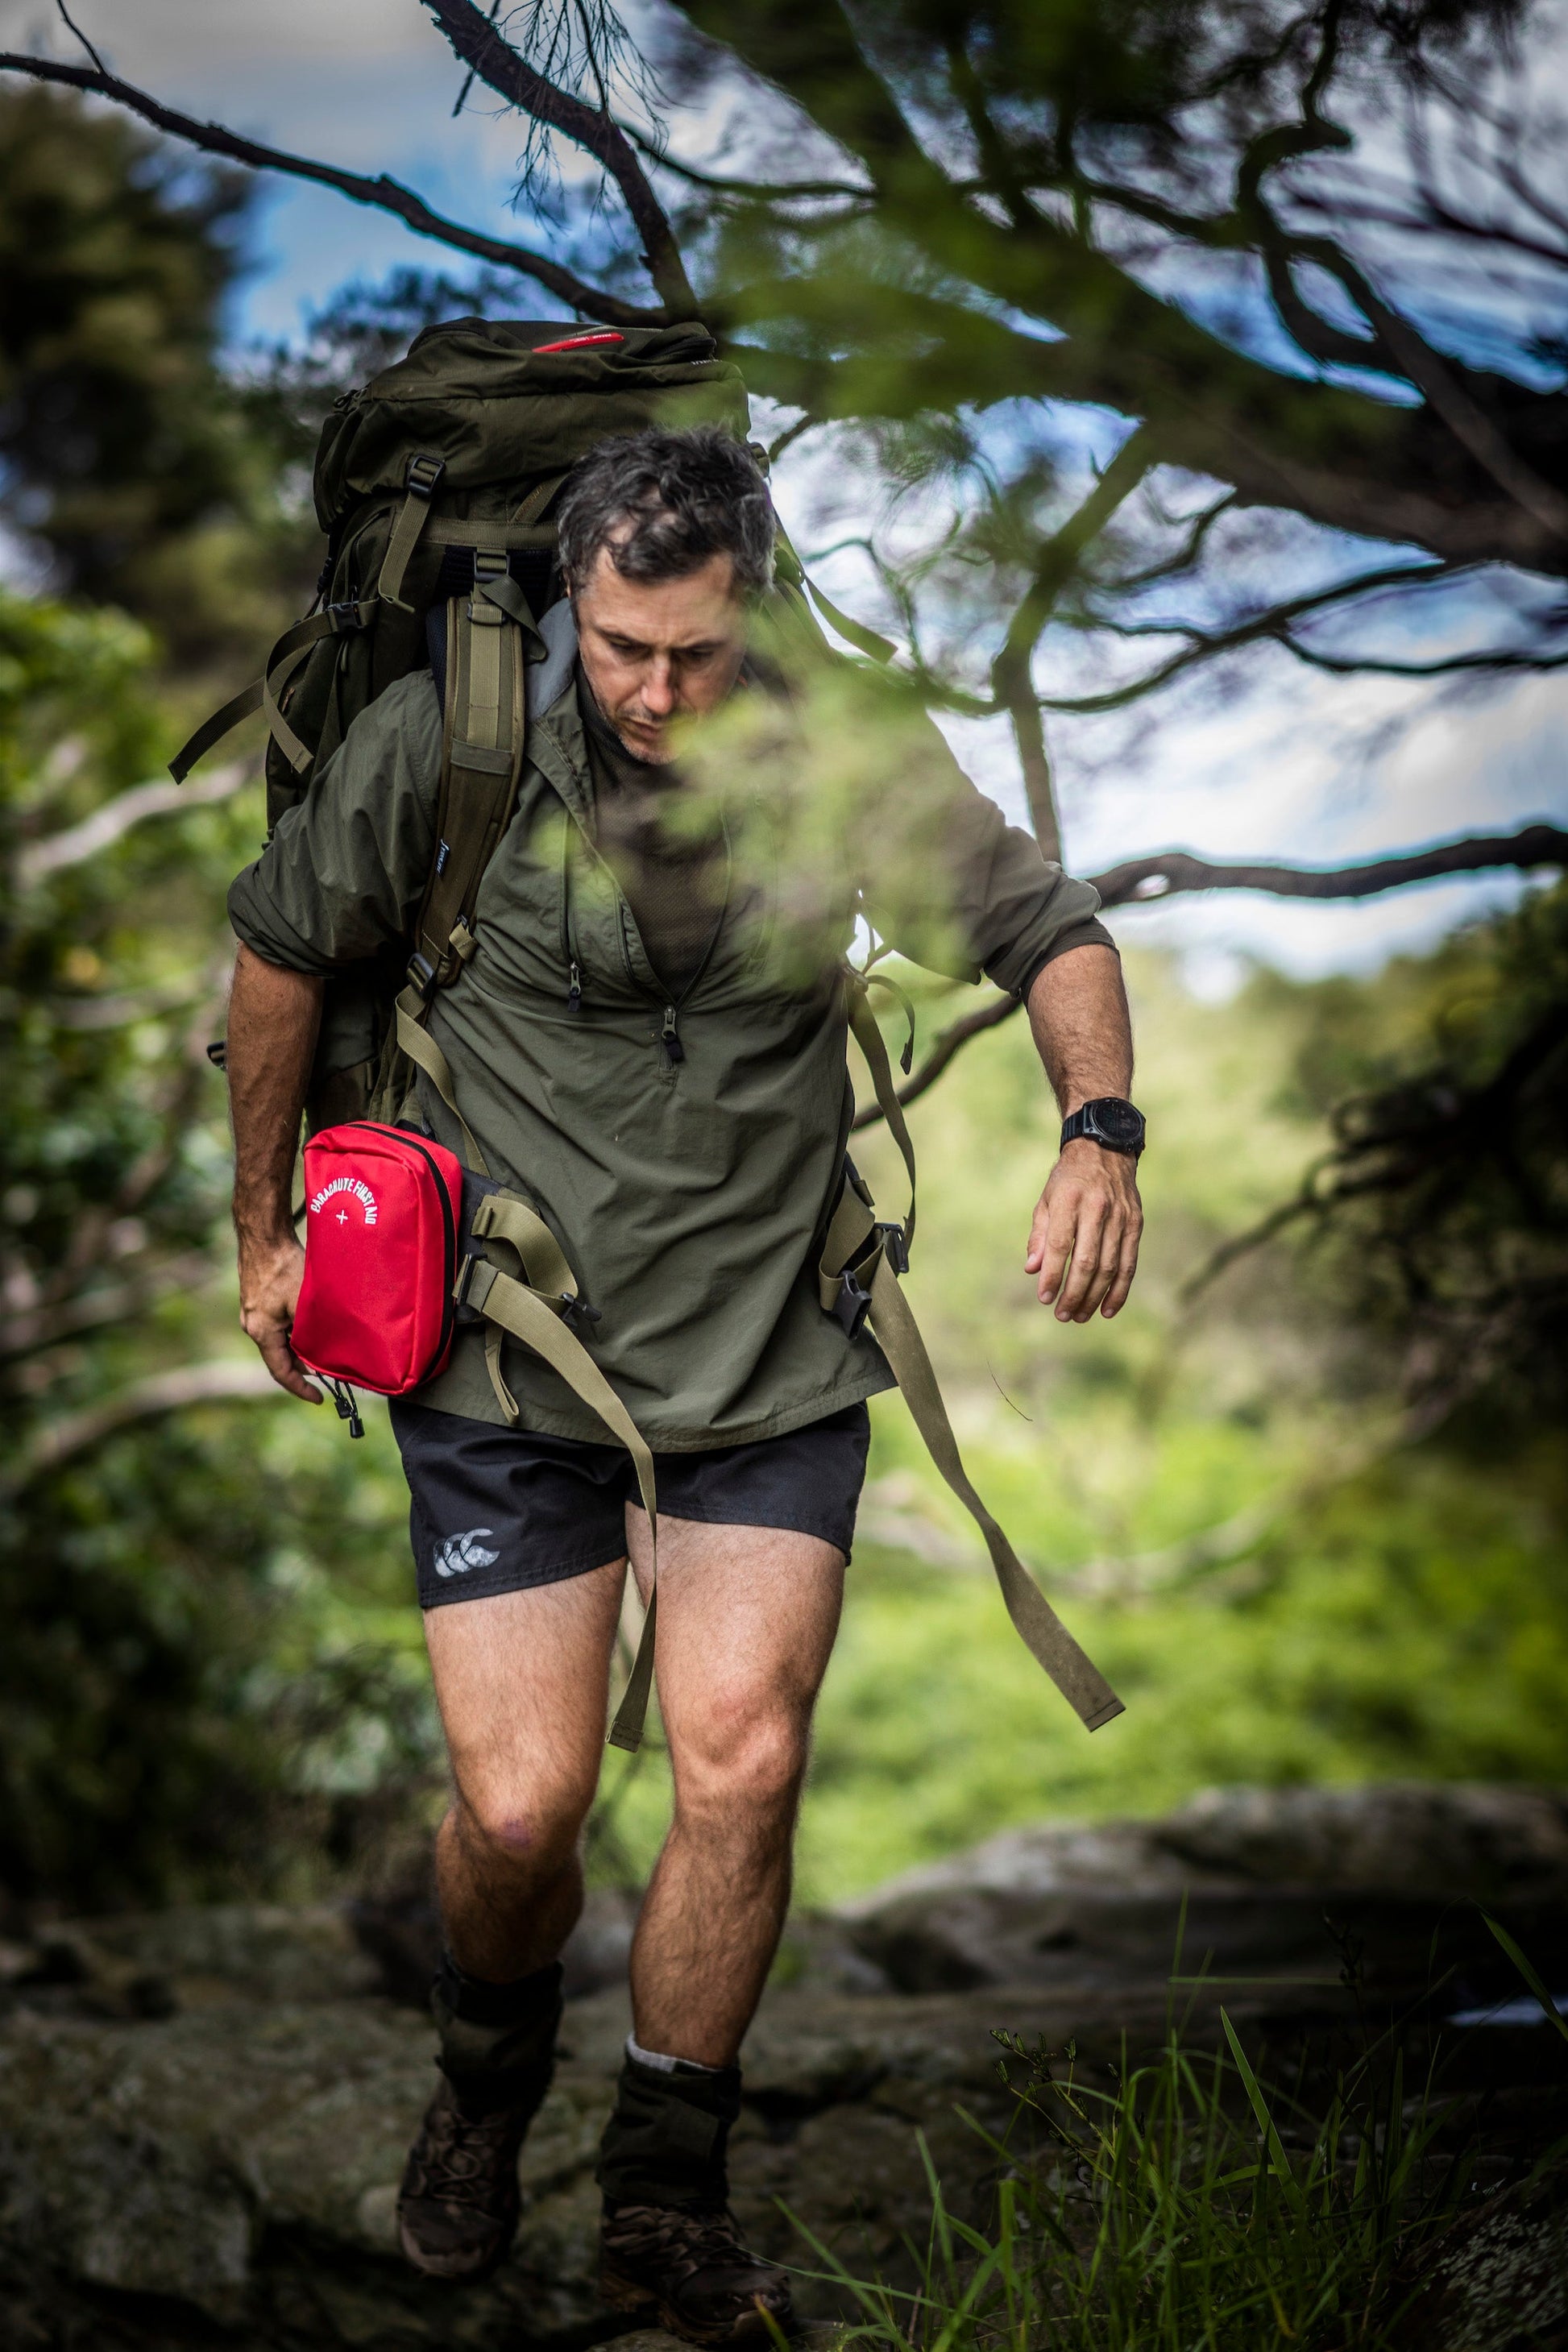 Tough hunting first aid kit for New Zealand conditions